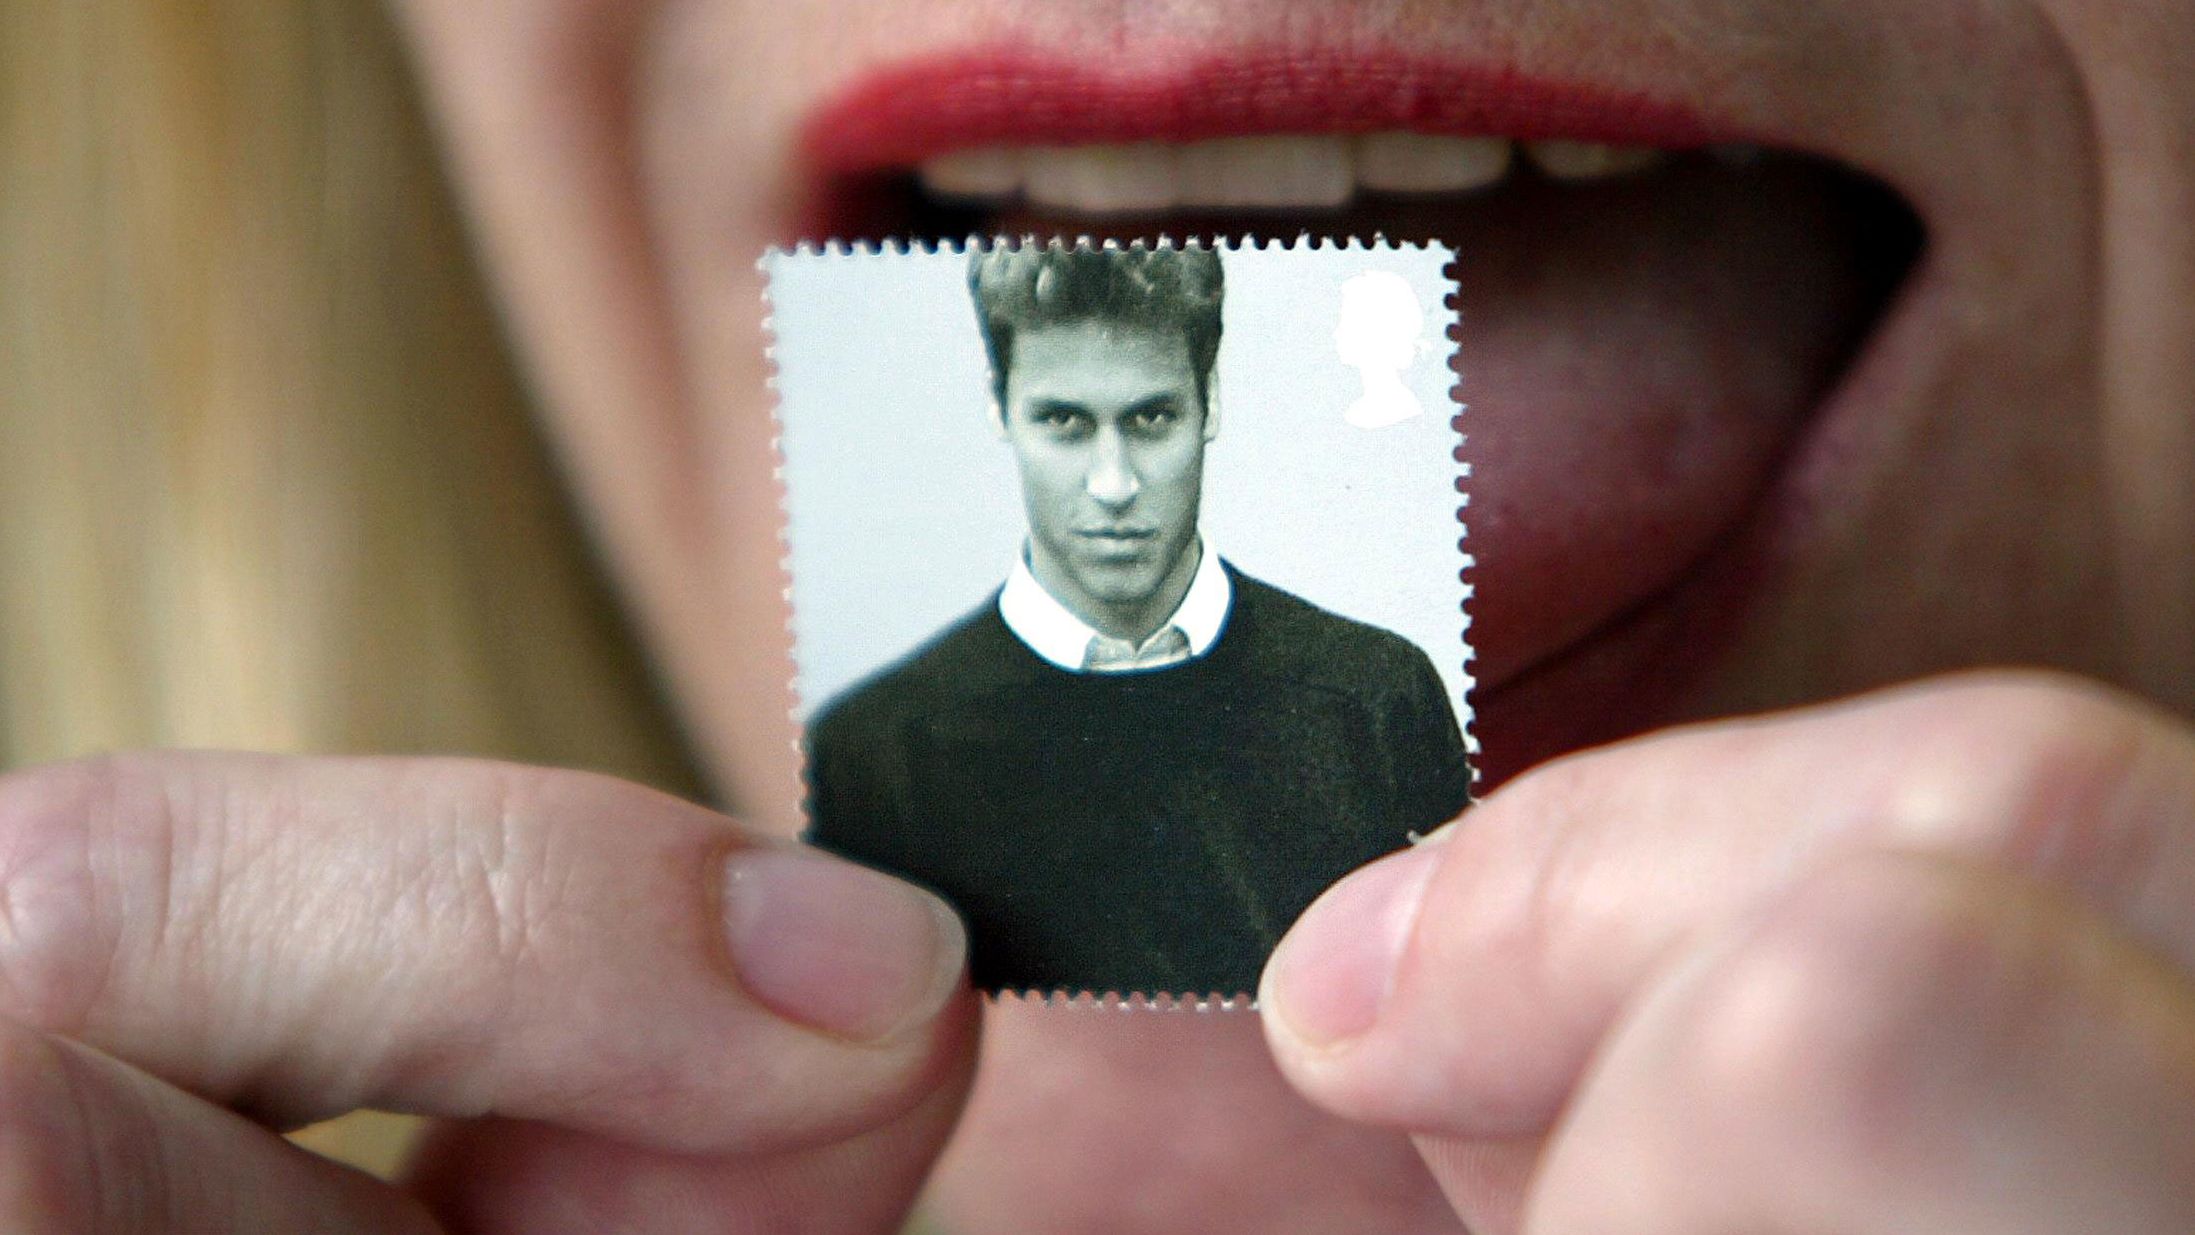 A London office worker licks a first-class stamp that was issued to mark Prince William's 21st birthday in 2003. Commemorative coins were also minted for the occasion.